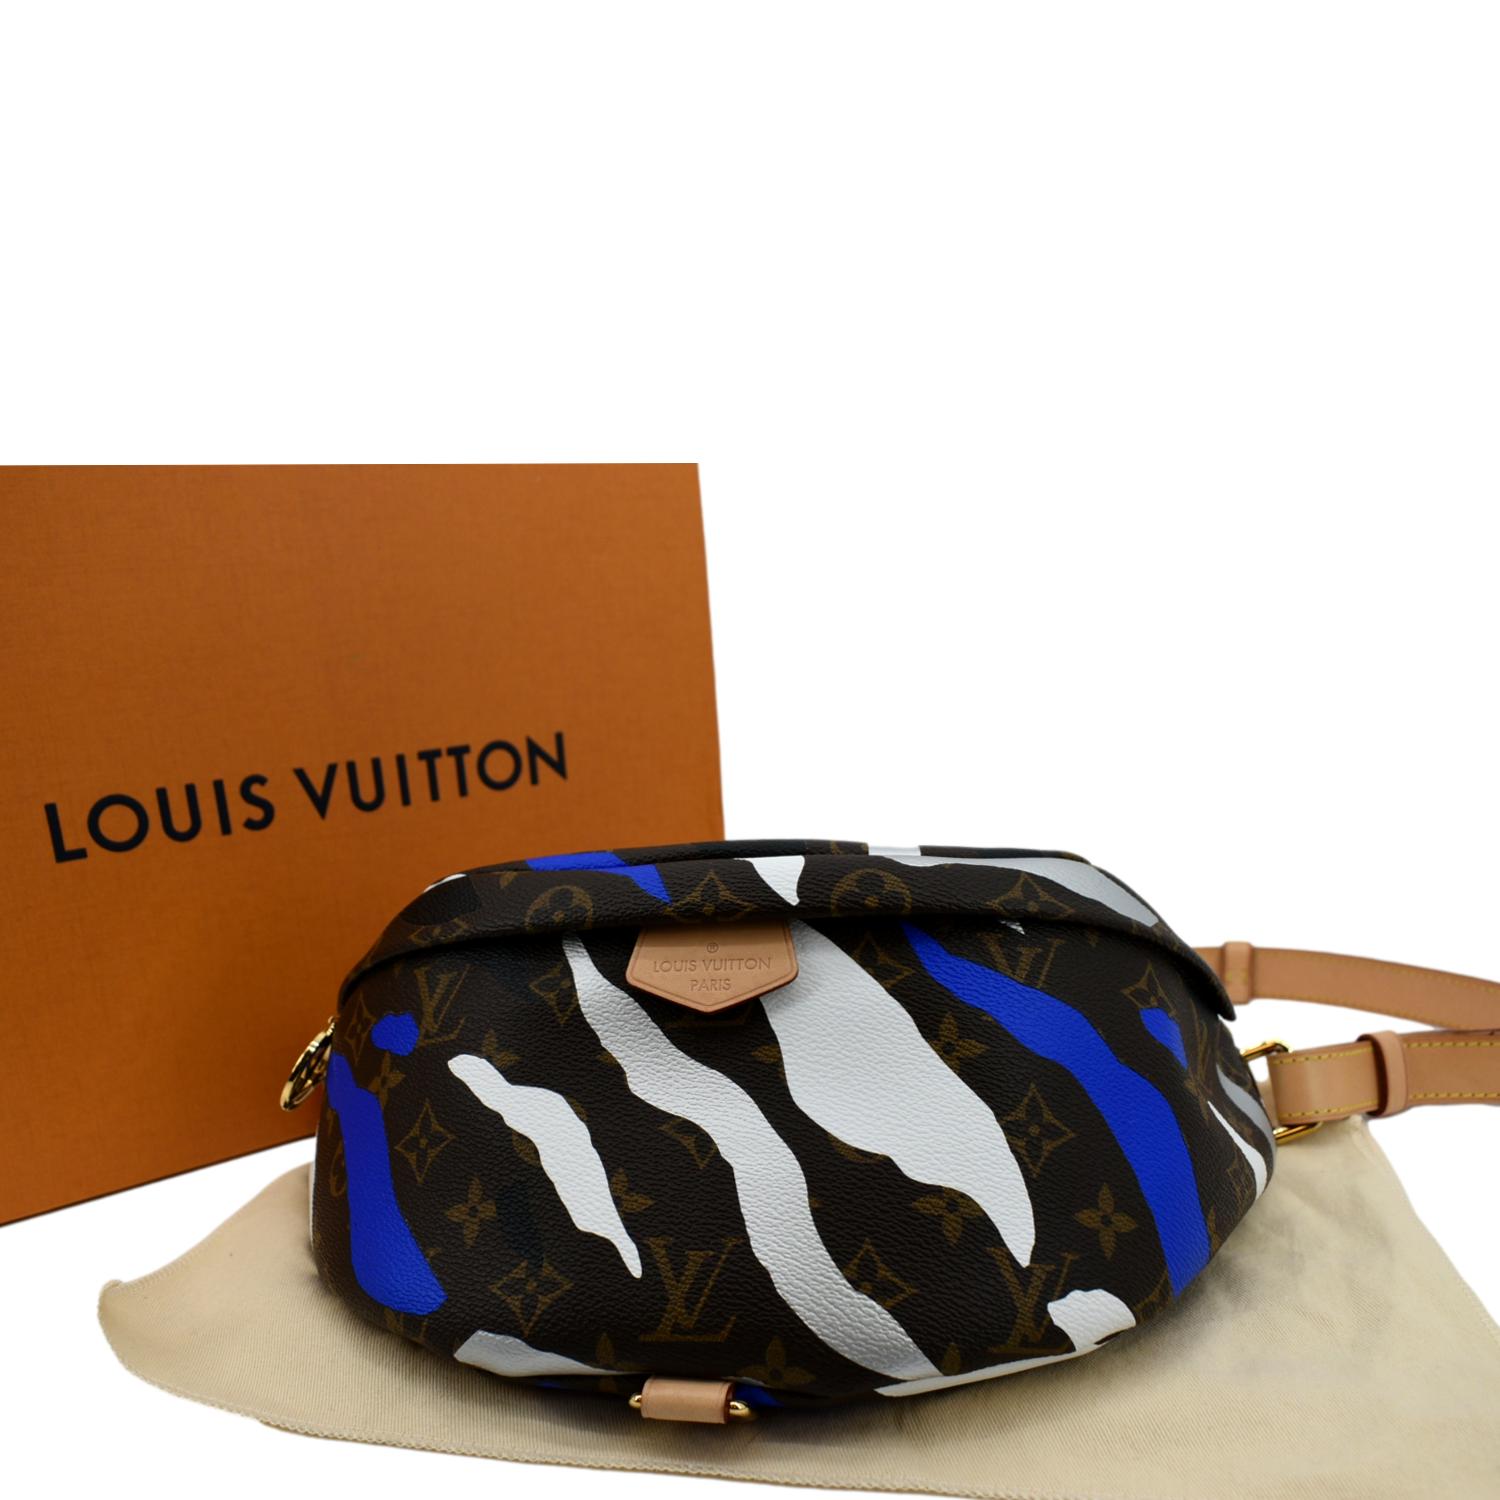 Opinion: Louis Vuitton's LVxLoL Collection Helps the Brand